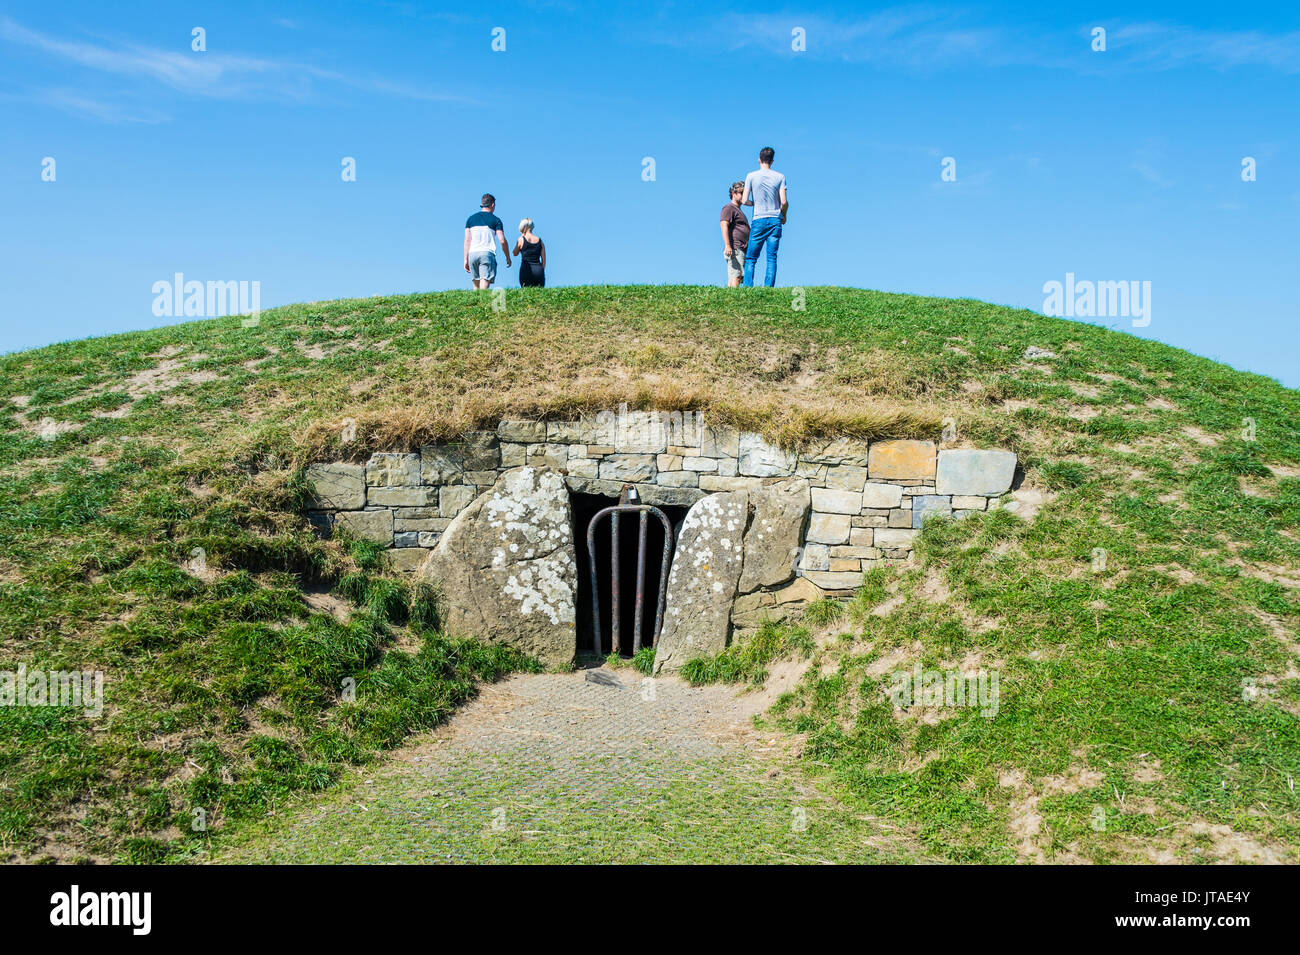 Mount of the Hostages, former high seat of the High King of Tara, Hill of Tara, County Meath, Leinster, Republic of Ireland Stock Photo